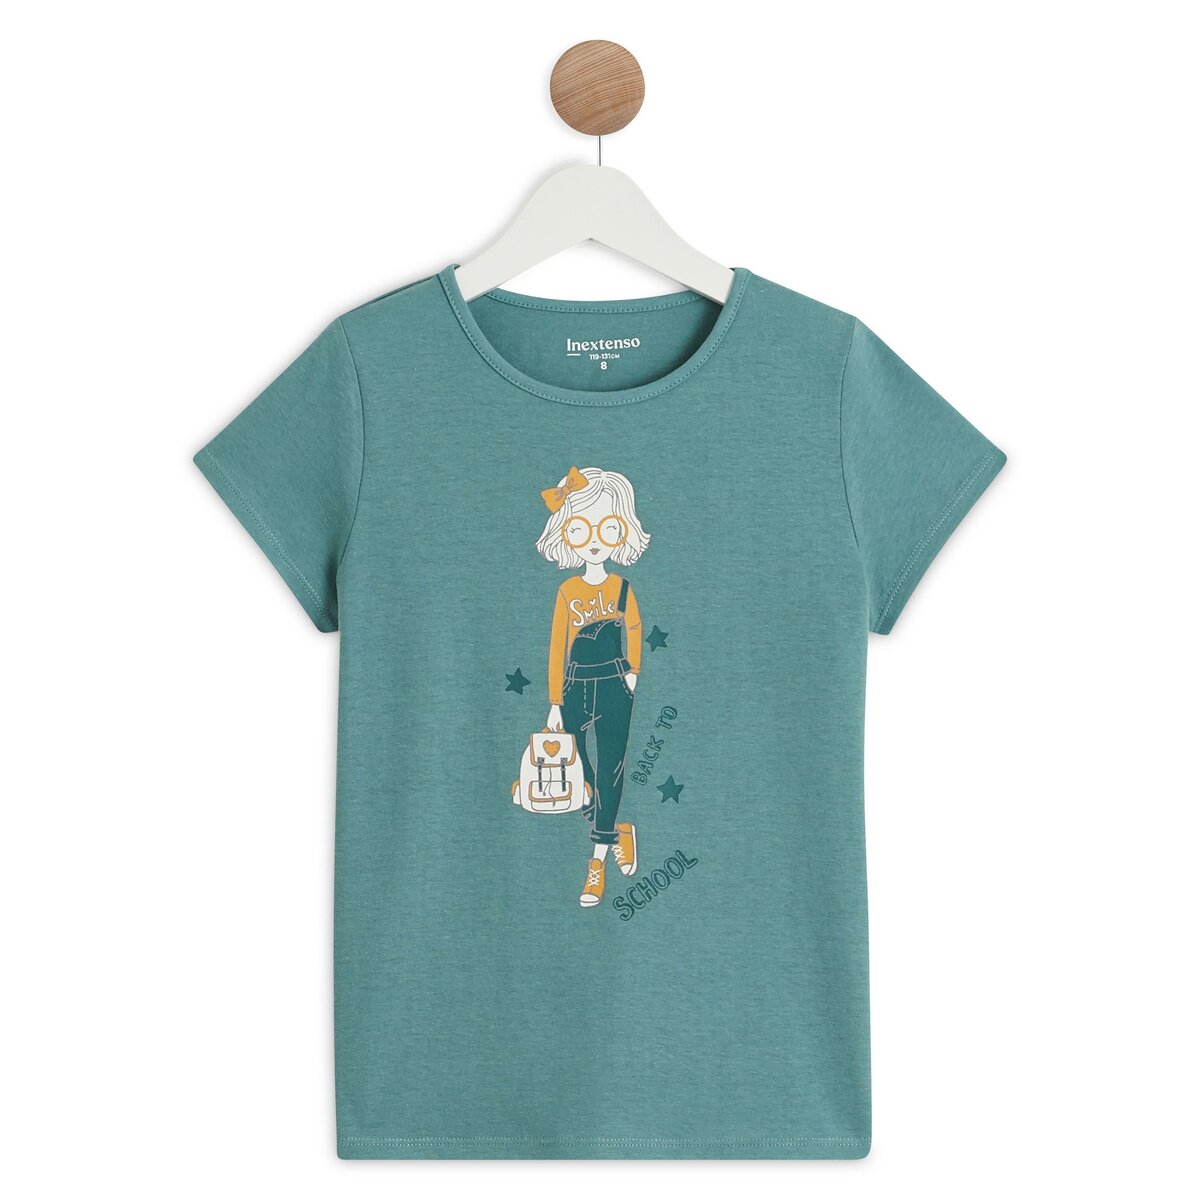 INEXTENSO T-shirt manches courtes fille